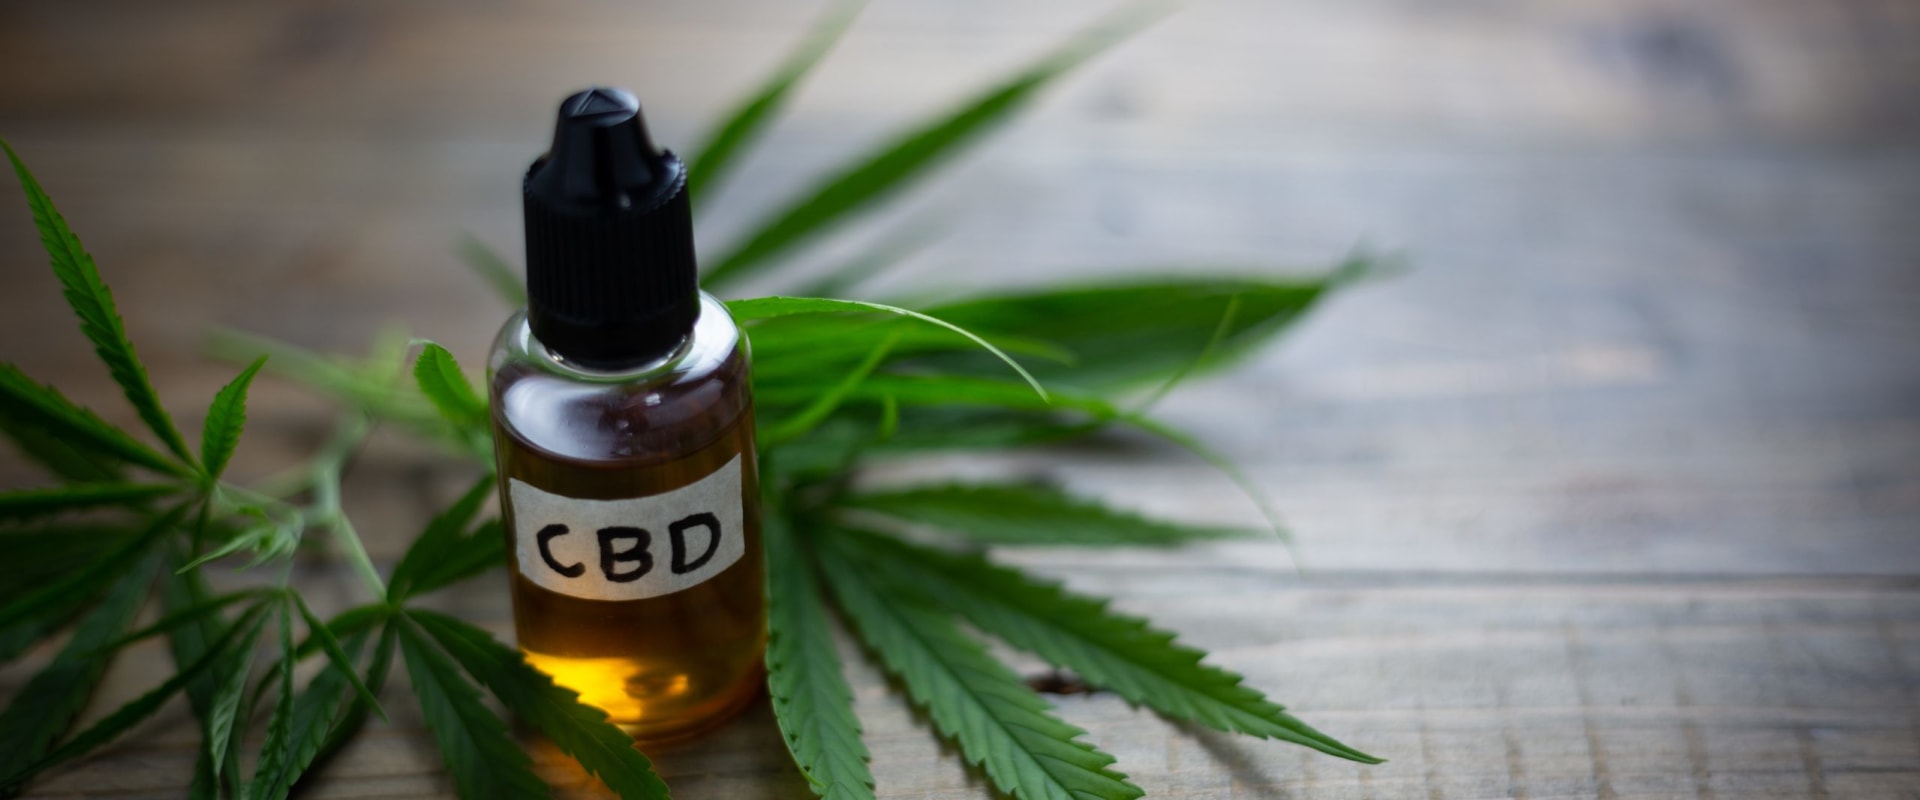 Types of CBD Products for Parkinson's Disease